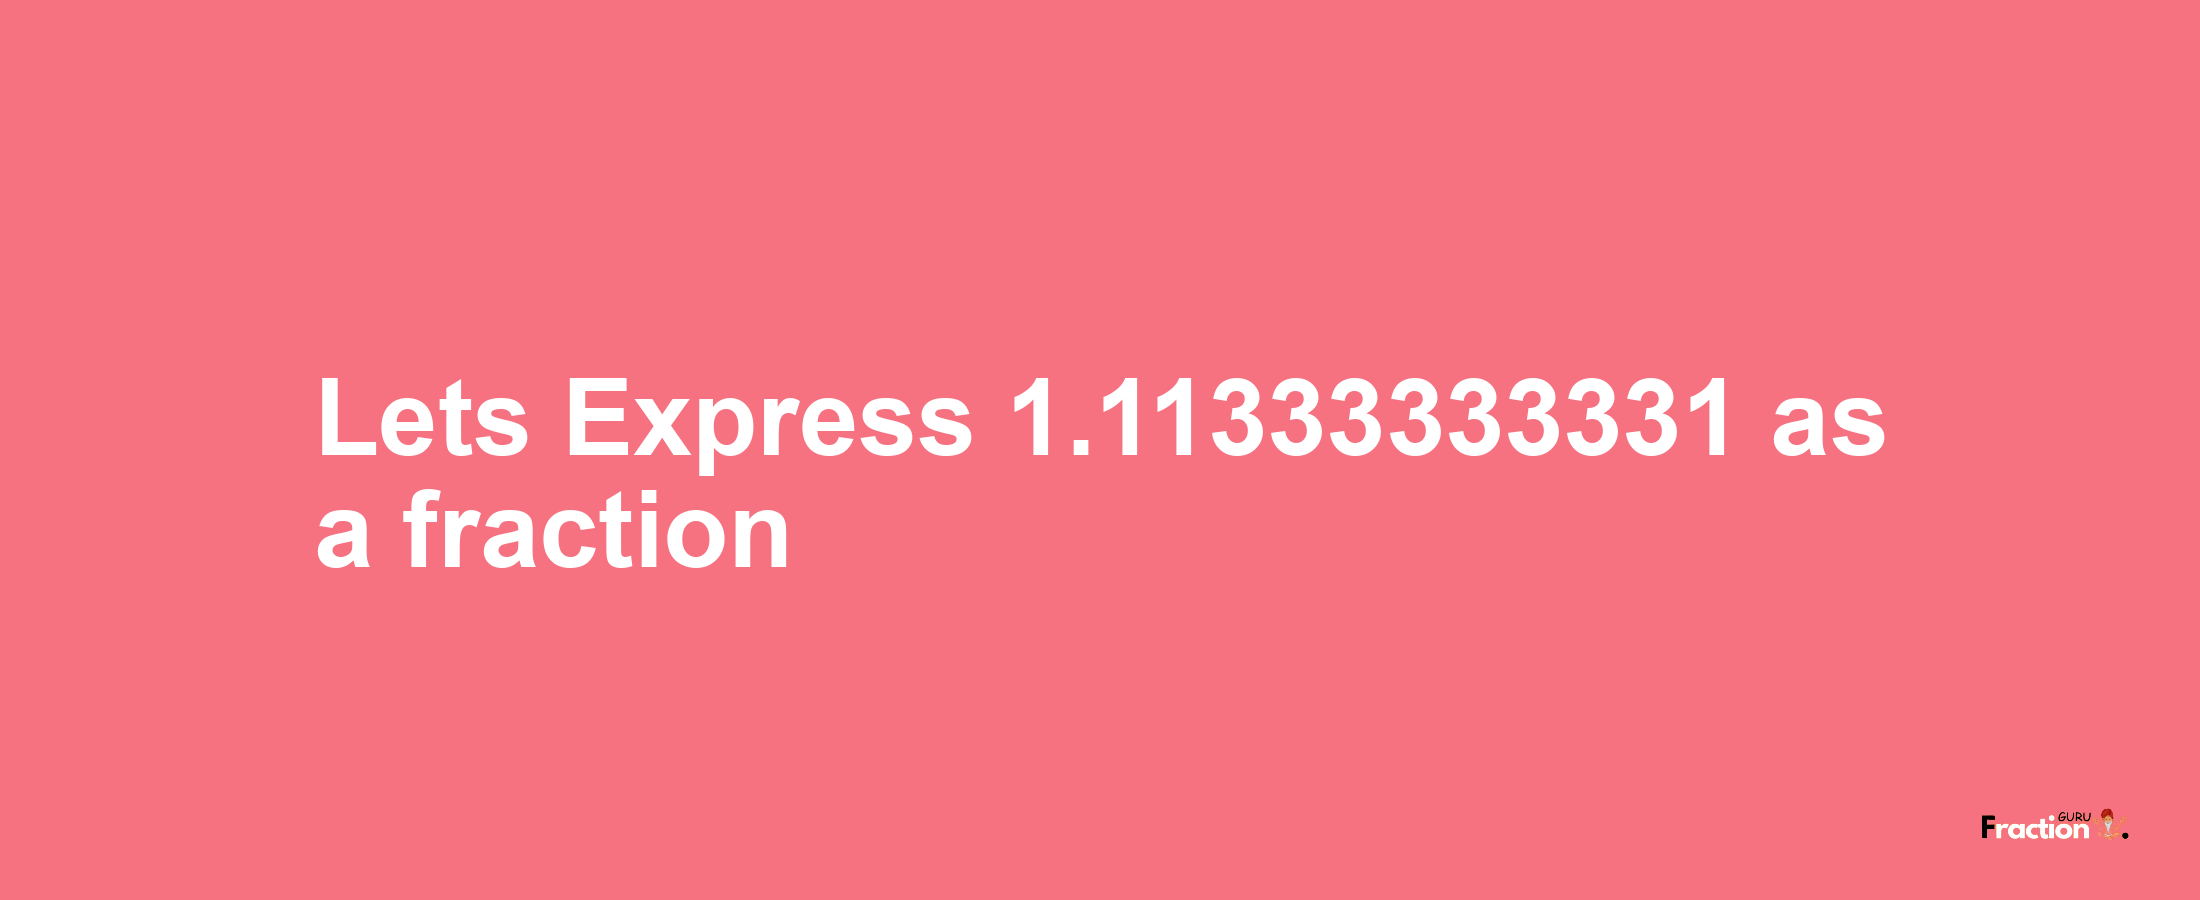 Lets Express 1.11333333331 as afraction